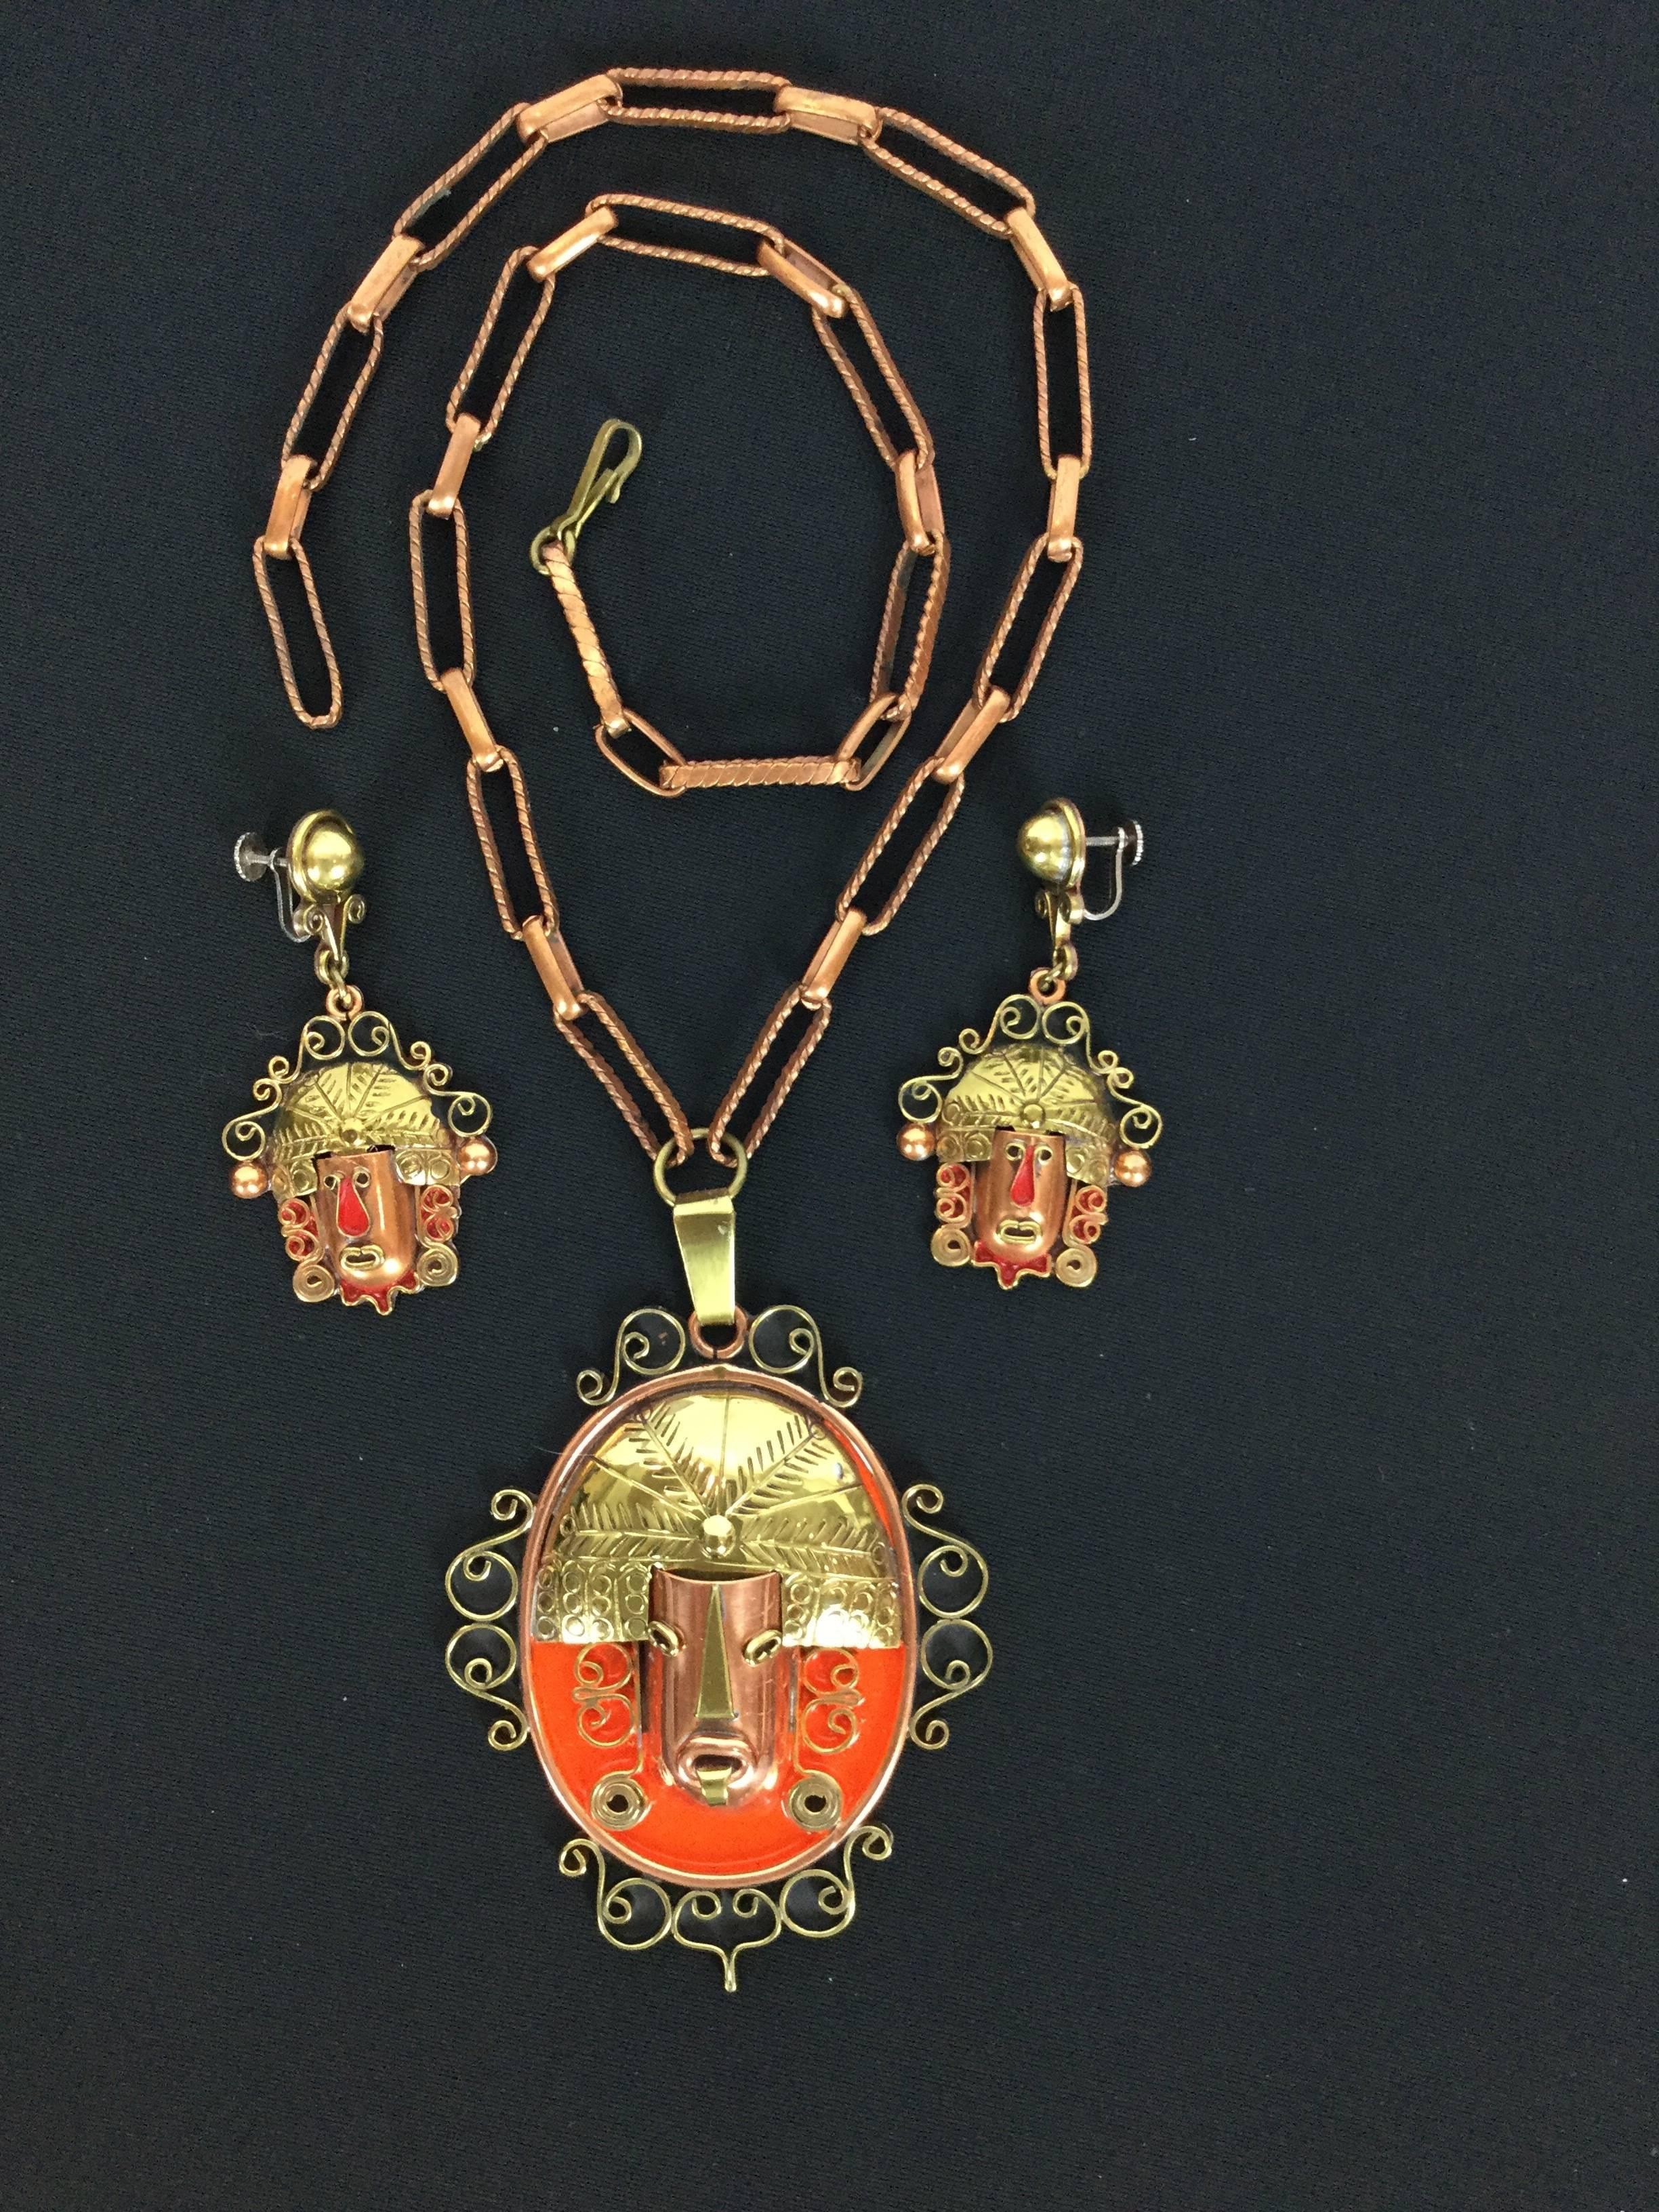 
This set is so striking and usual.  

It takes the theme of highly stylized faces rendered in brass, copper, and enamel.

The enamel is a sort of orangey/red.

Very Tribal and dramatic.  Definitely a set for those who like their
costume